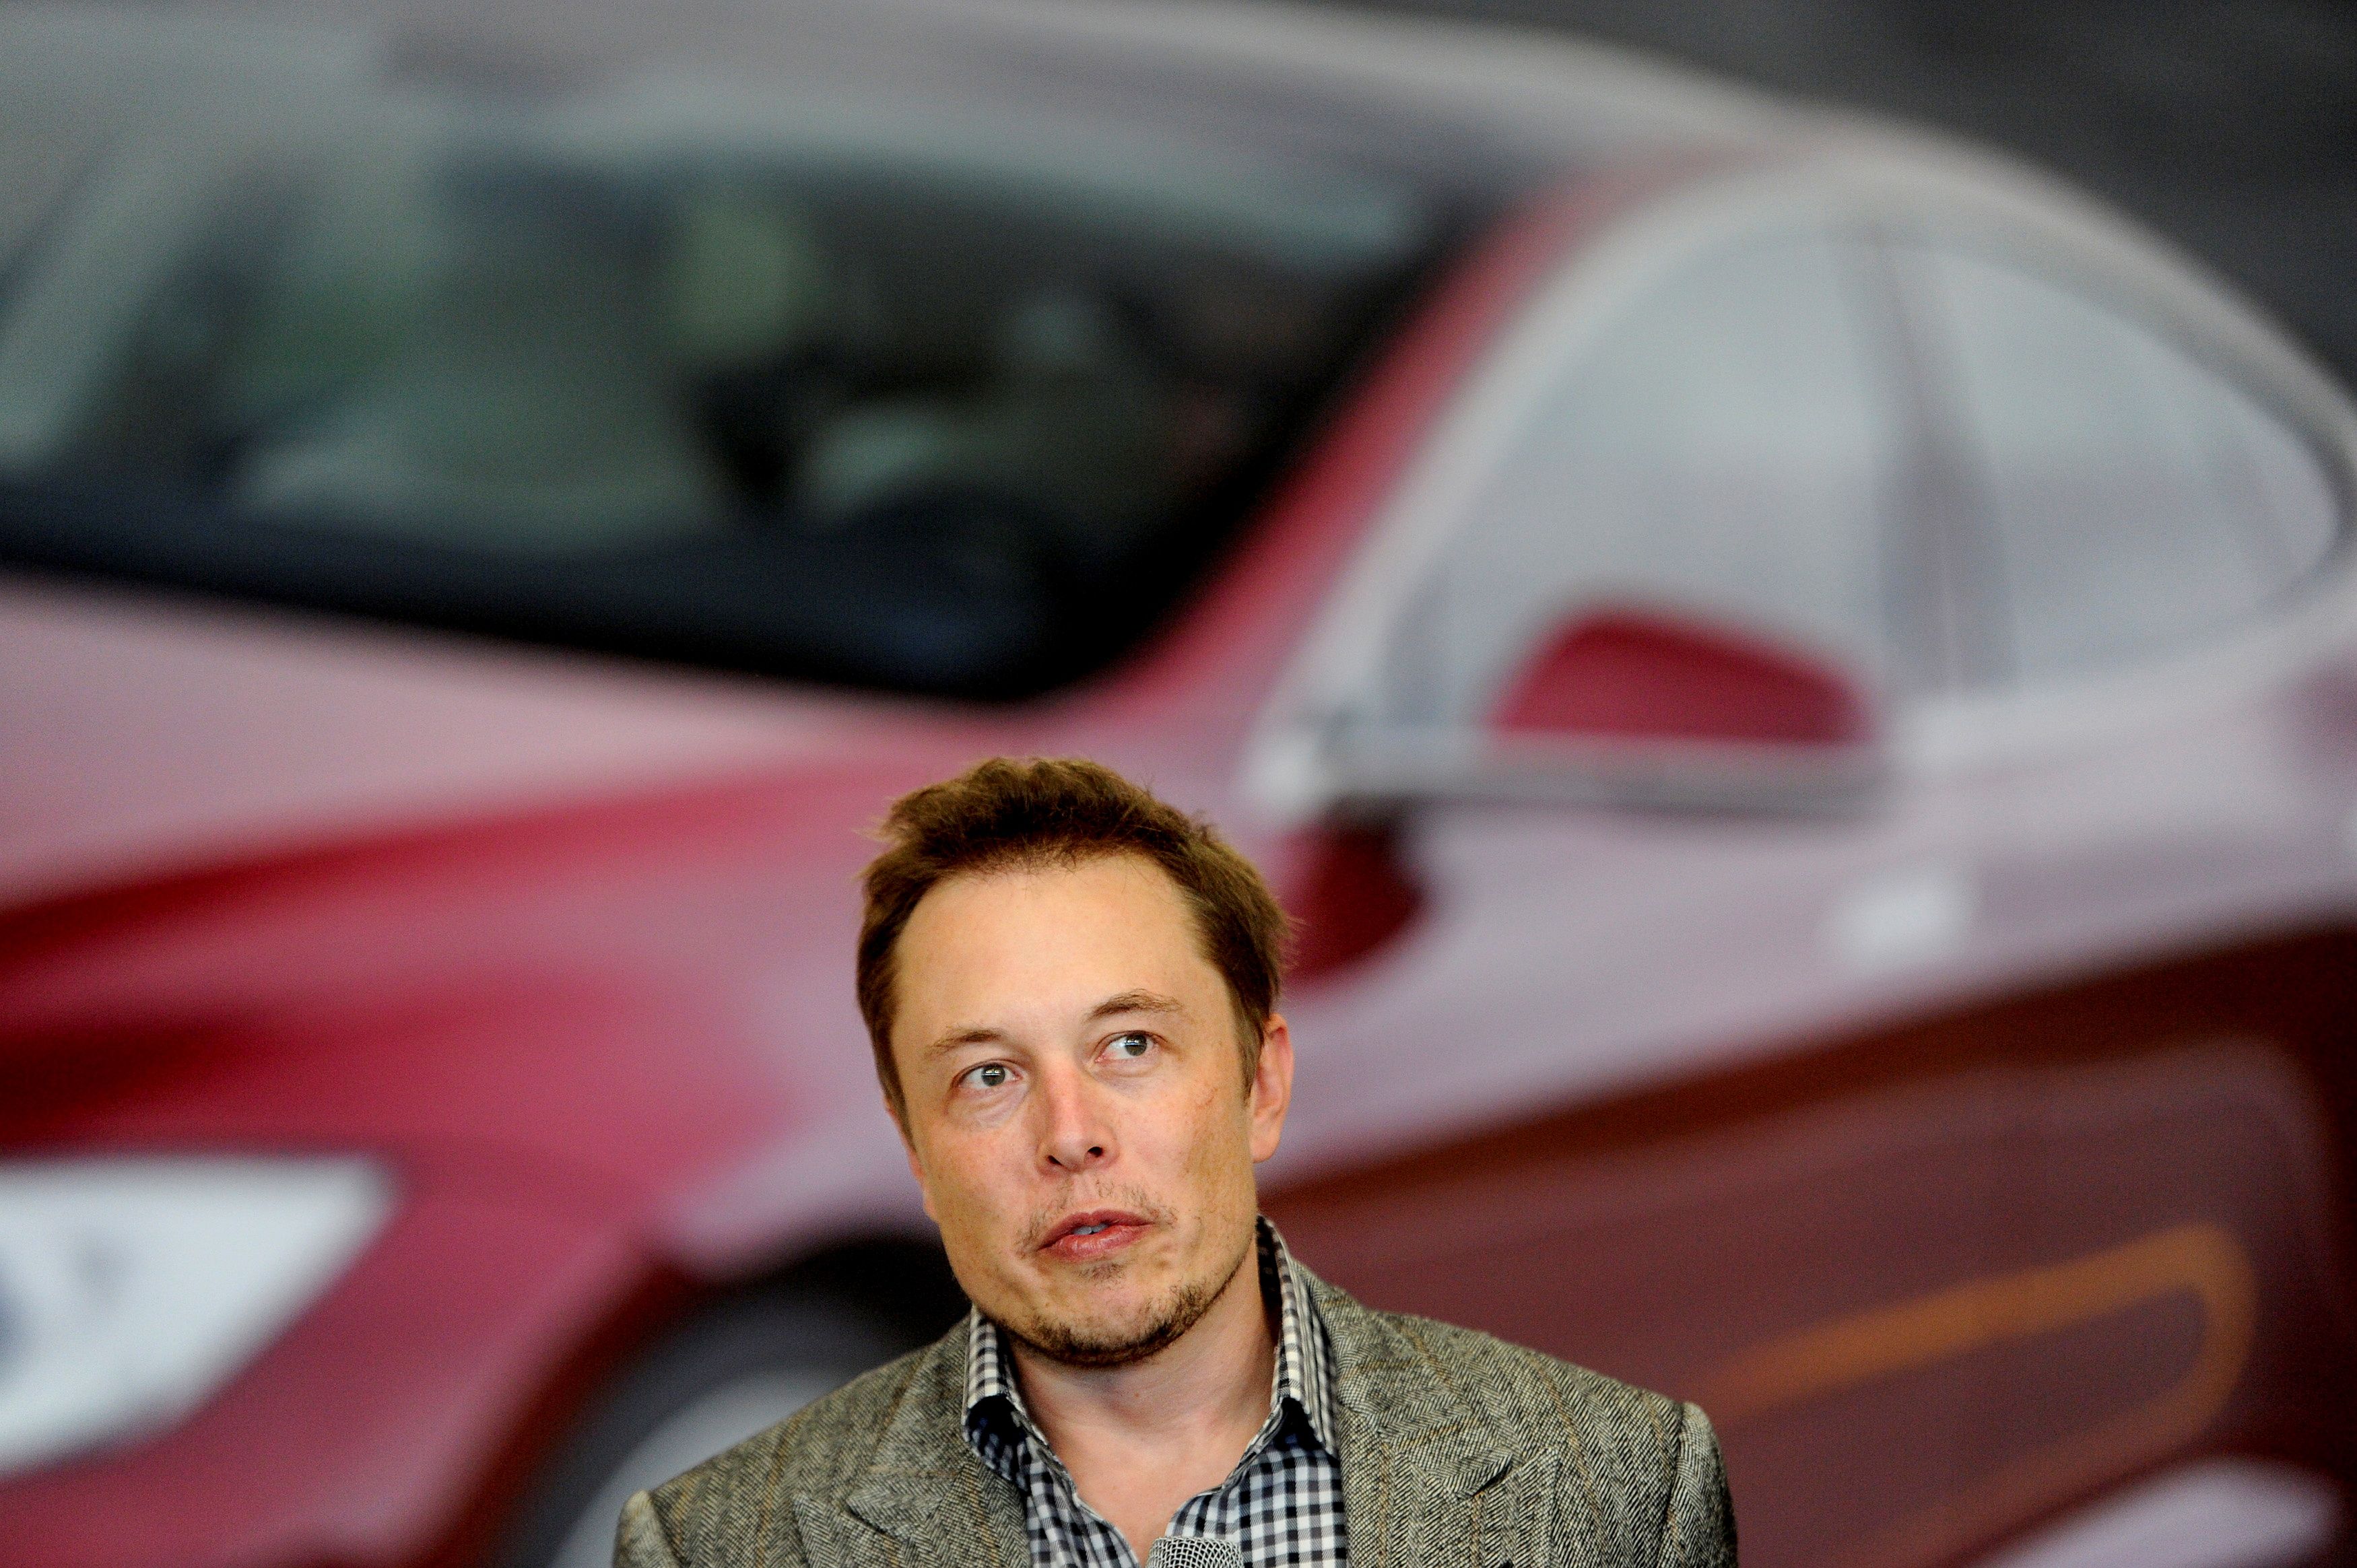 Tesla Chief Executive Office Elon Musk speaks at his company's factory in Fremont, California, June 22, 2012, as the car company began delivering its Model S electric sedan.   REUTERS/Noah Berger/File Photo